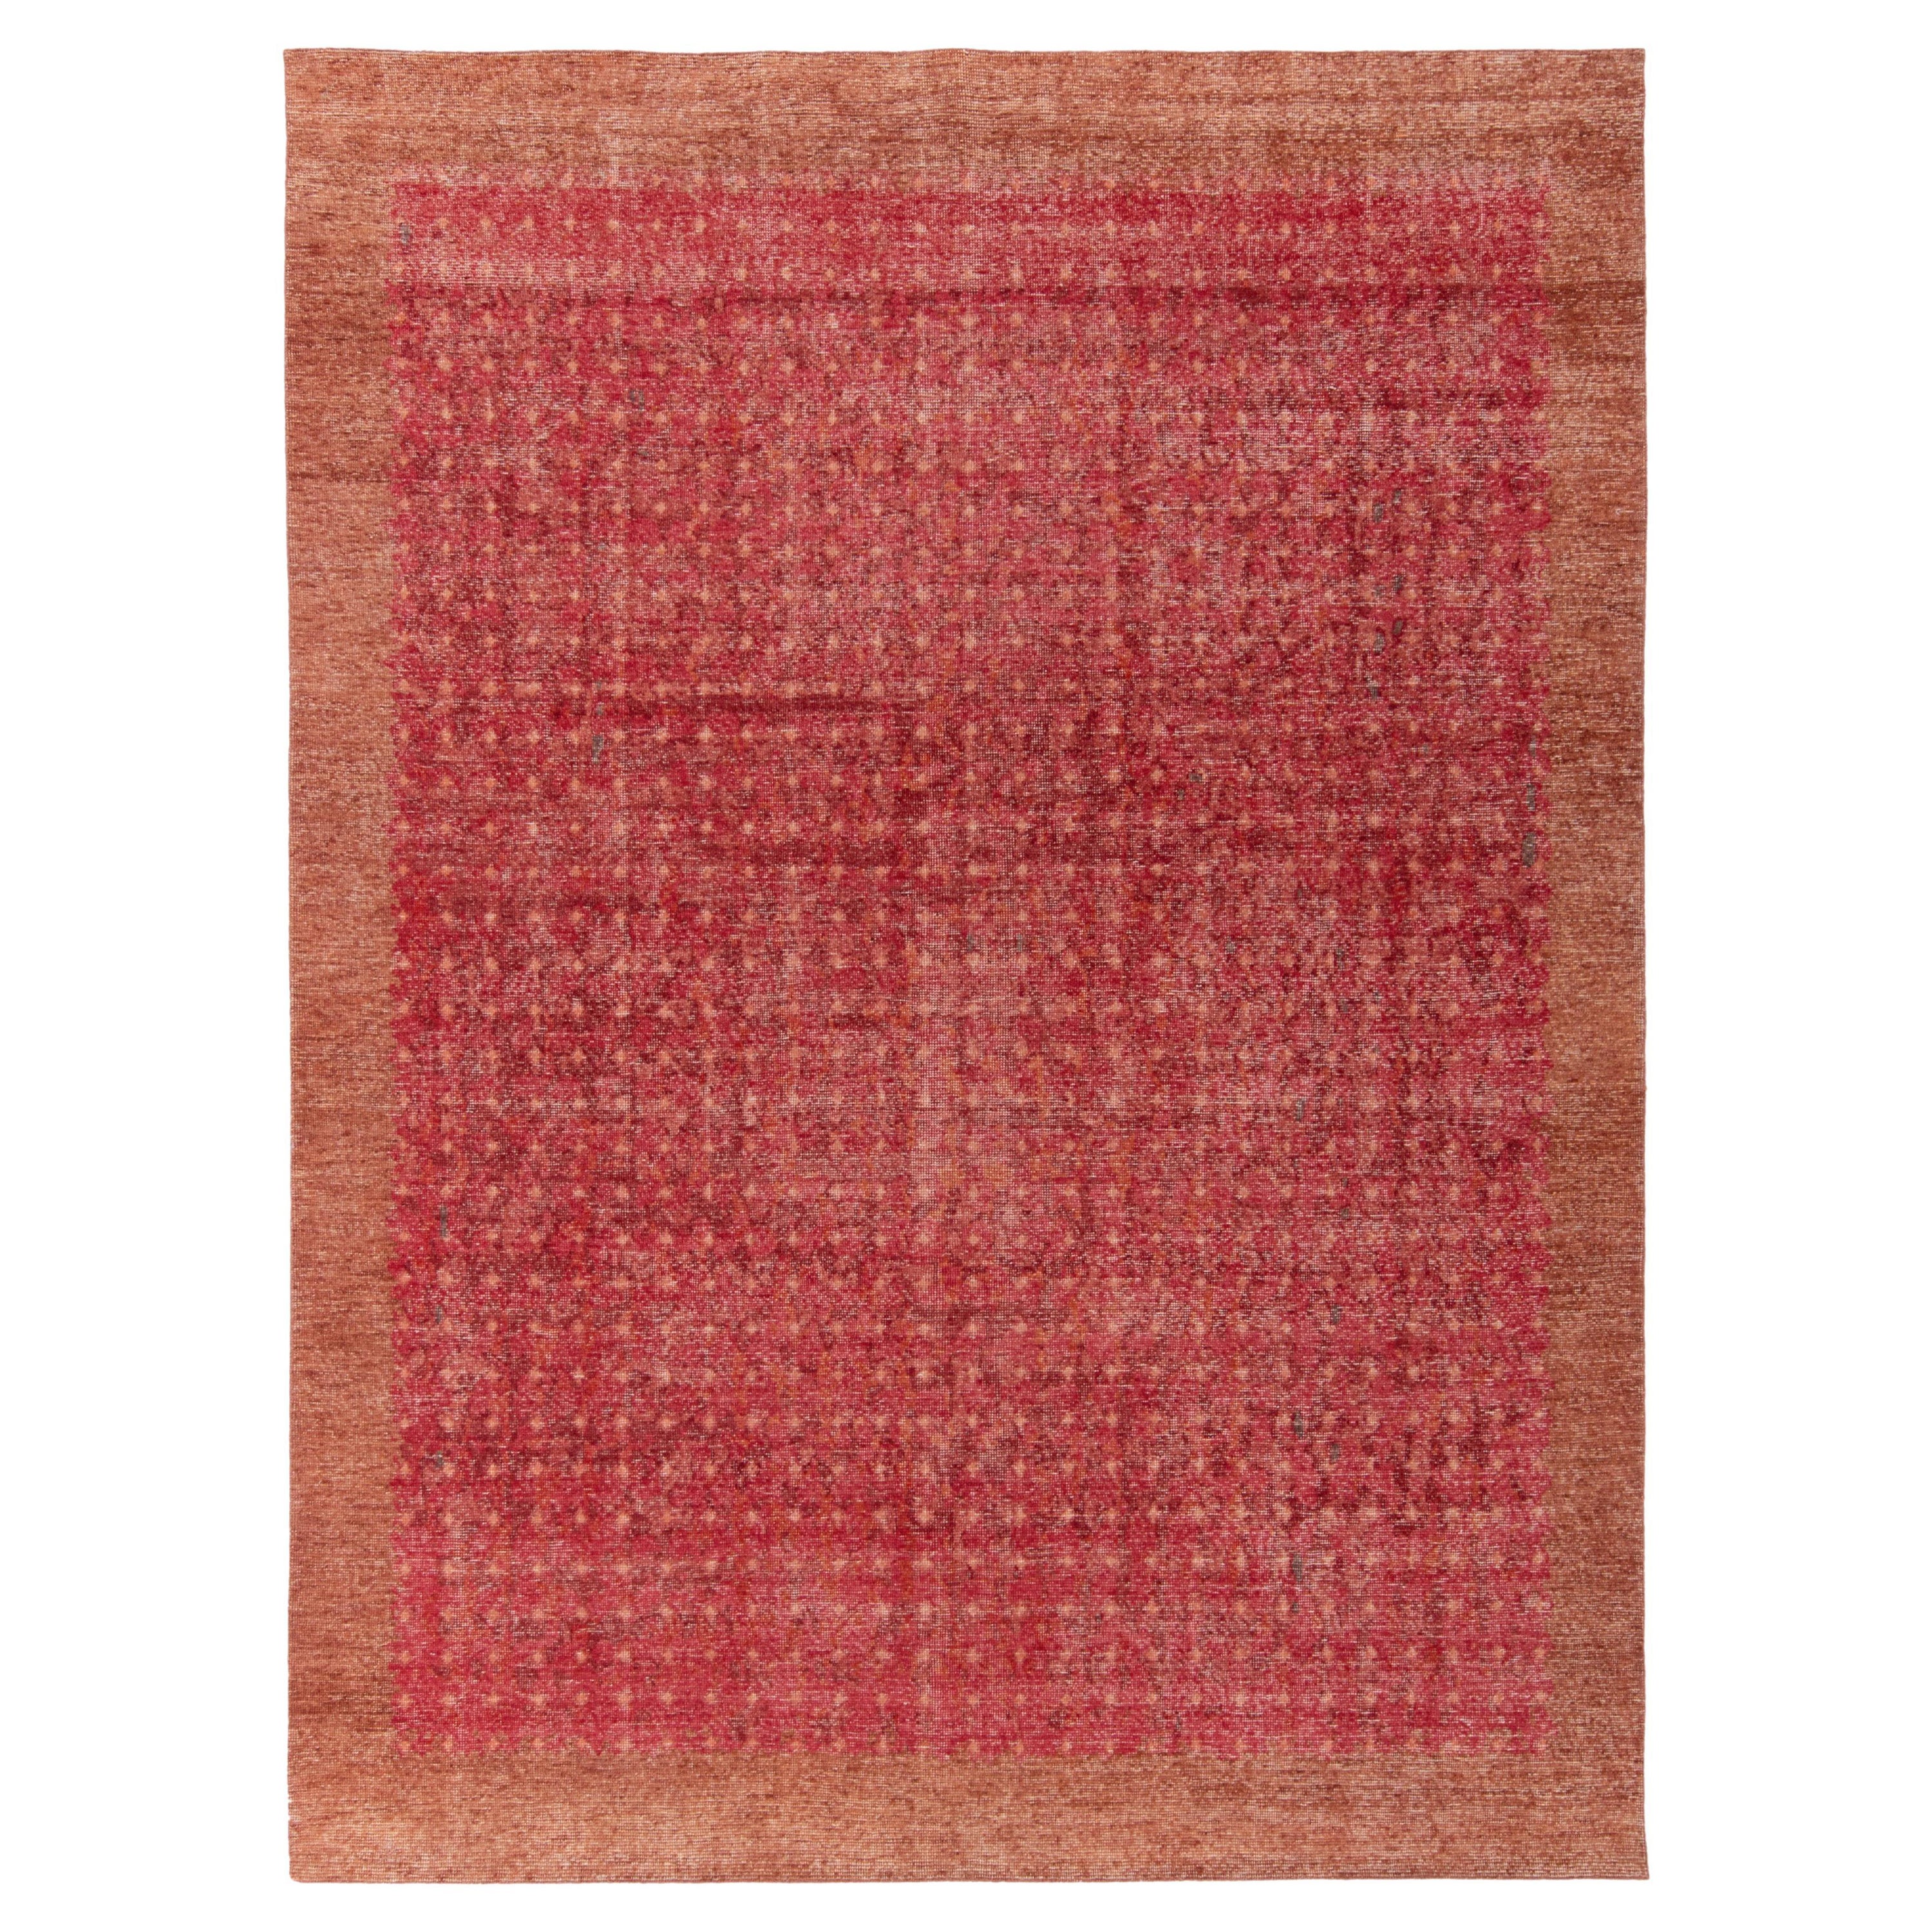 Rug & Kilim's Hand-Knotted Distressed Style Modern Rug in Red and Brown